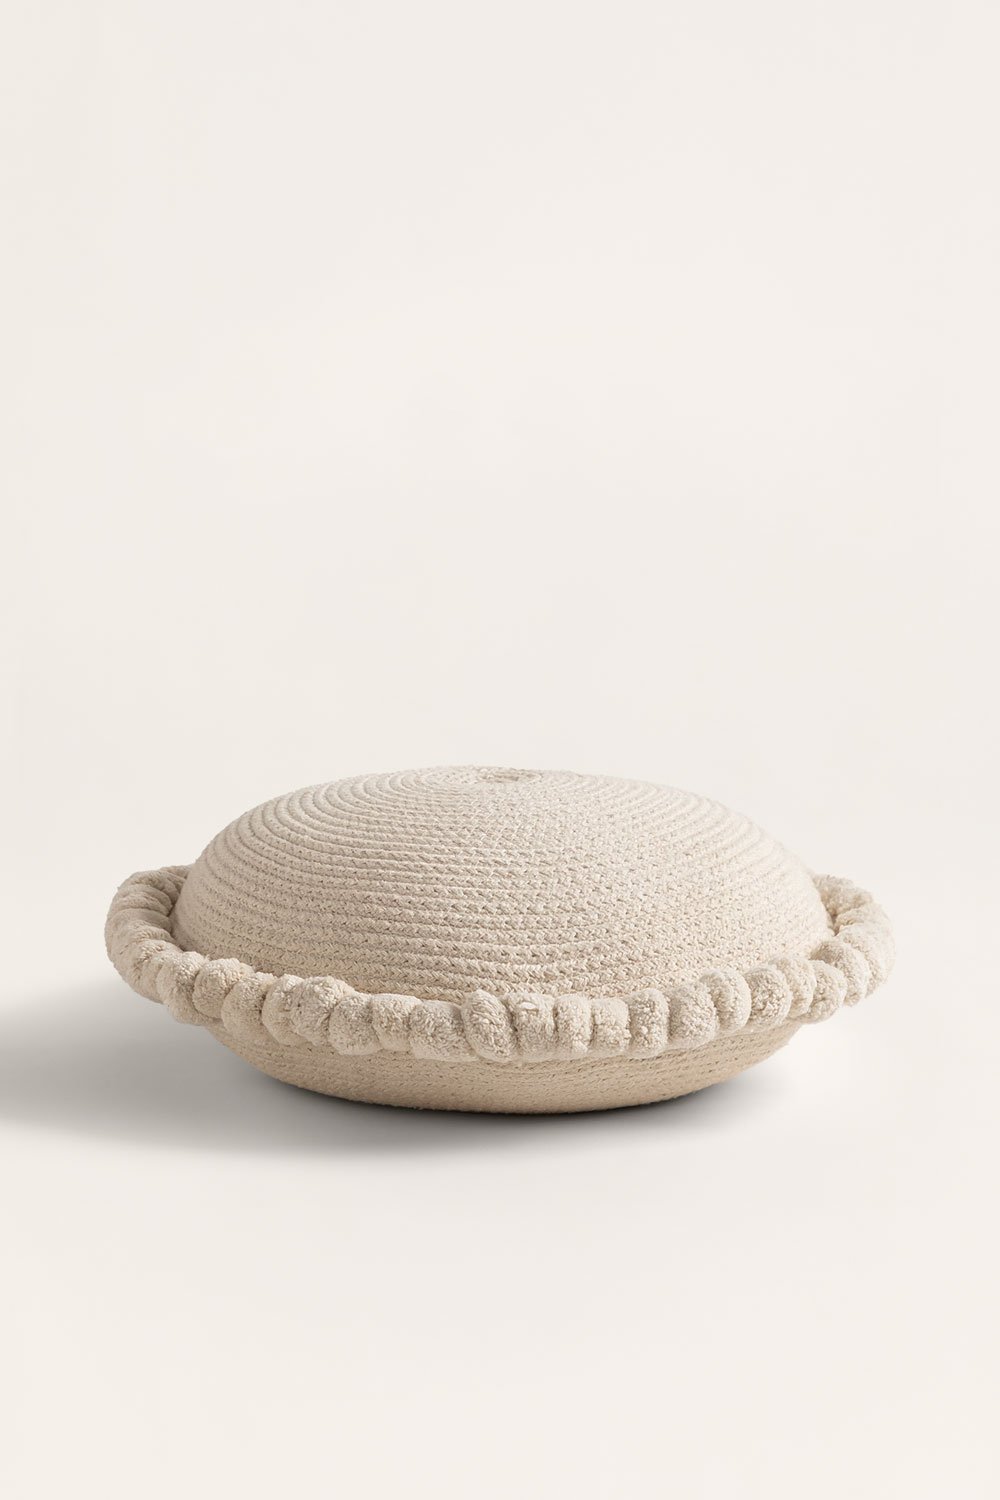 Olets Round Cotton Braided Cushion, gallery image 2